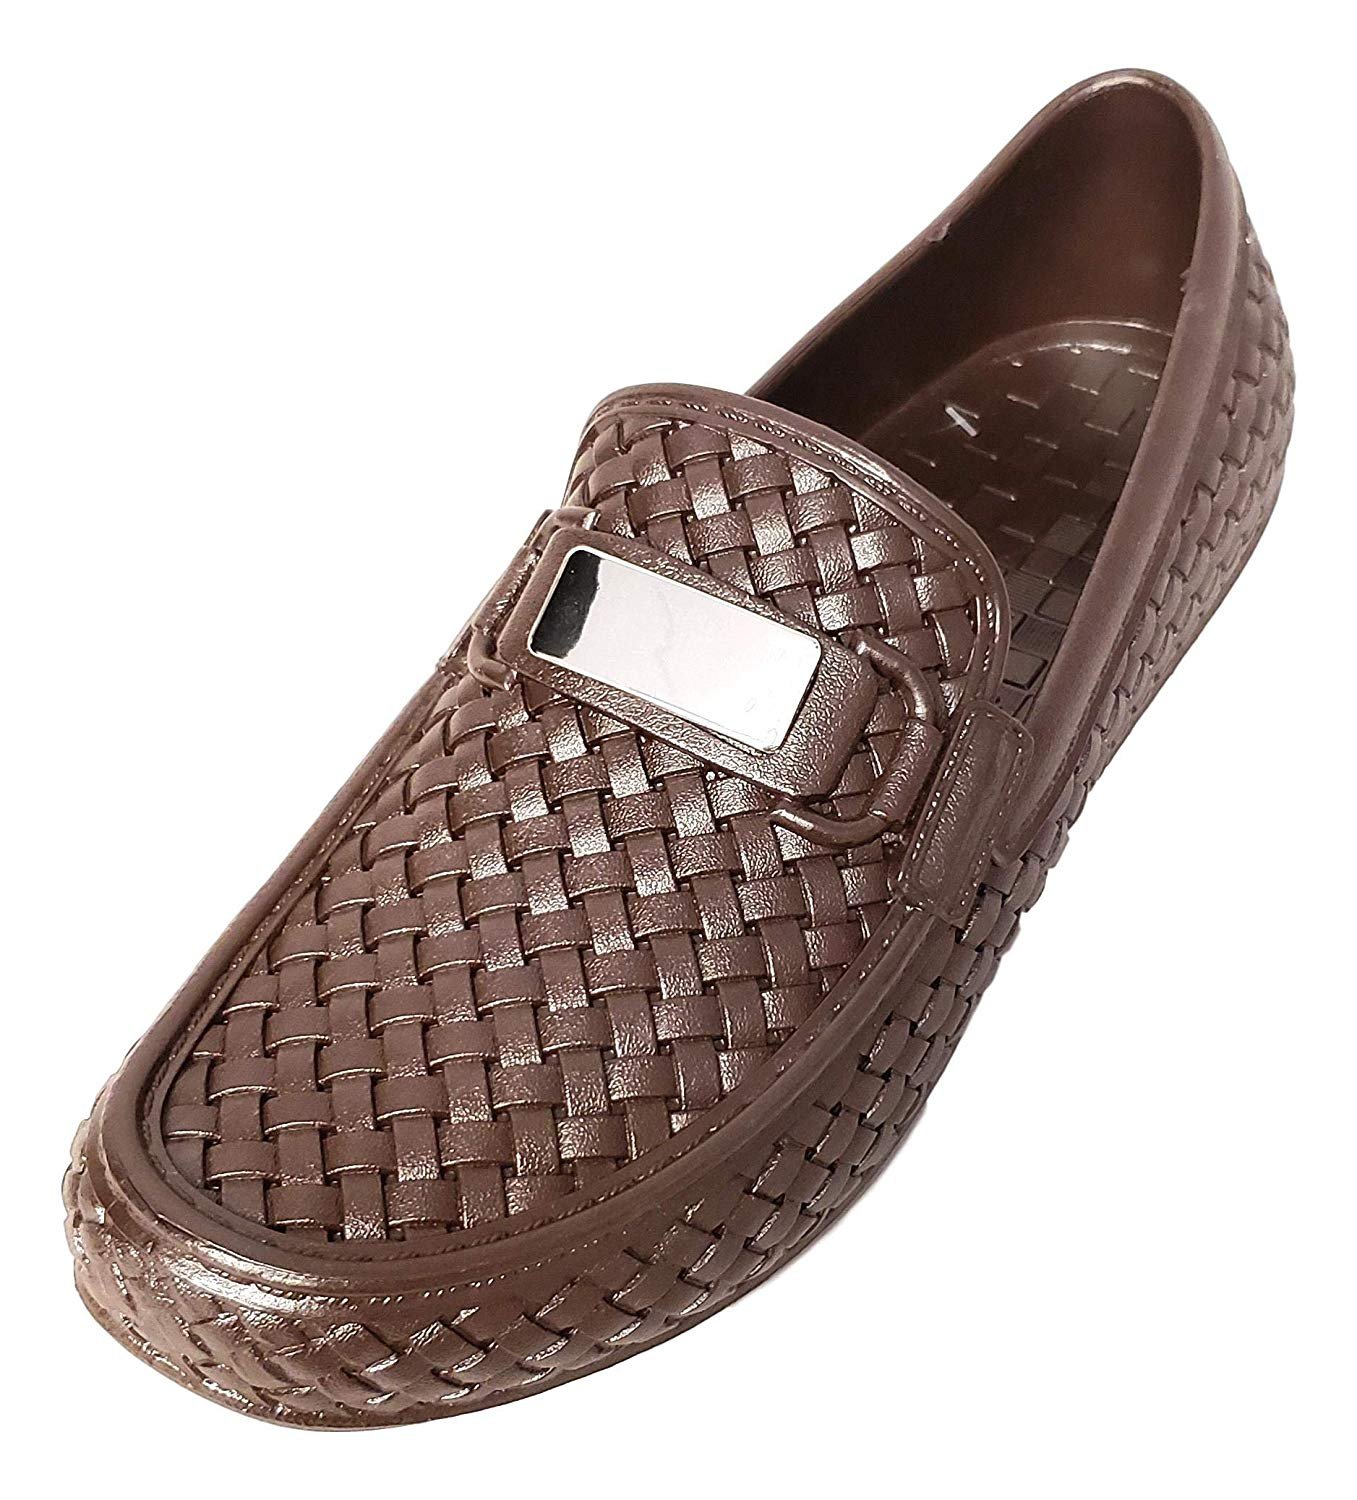 Mens Water Shoe Floater Loafers Classic Look Drivers 9 US M Mens, Brown - image 3 of 6